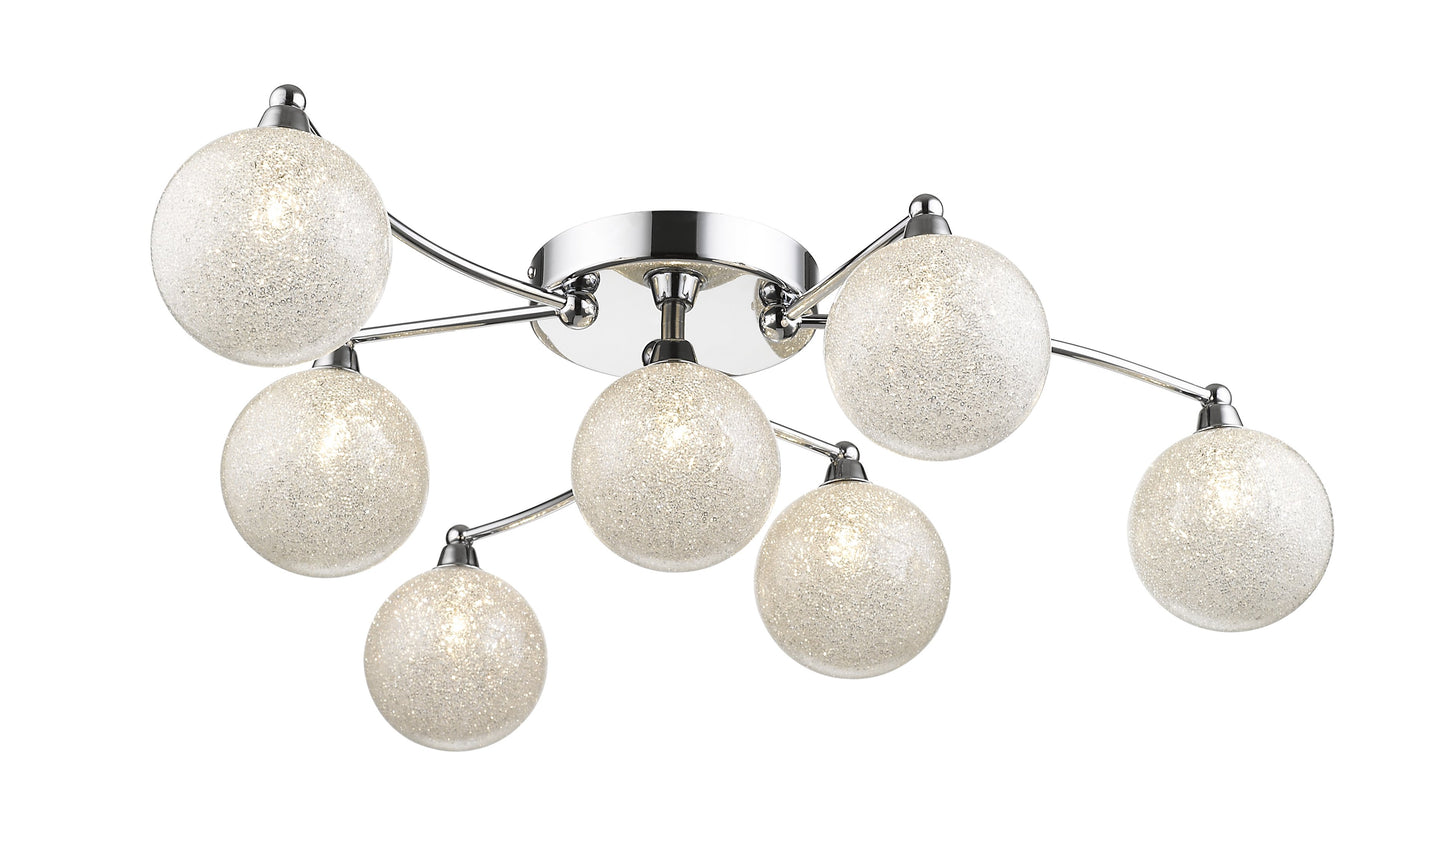 WIM Seven Lamp Crystal In Glass Globes Ceiling Light - ID 10508